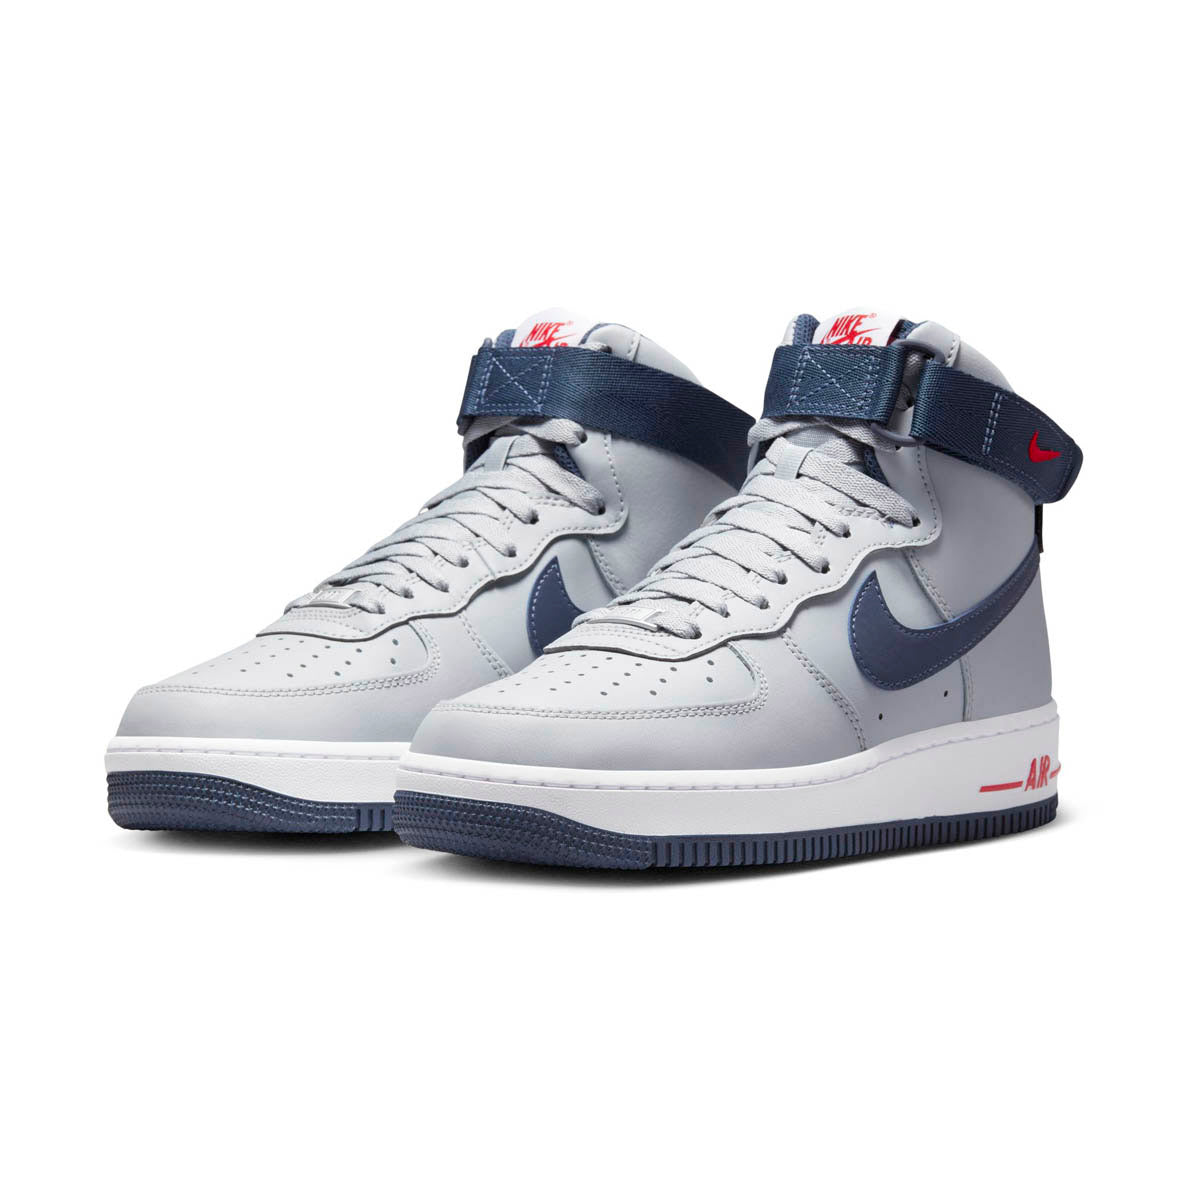 Nike Women's Air Force 1 High SE Shoes